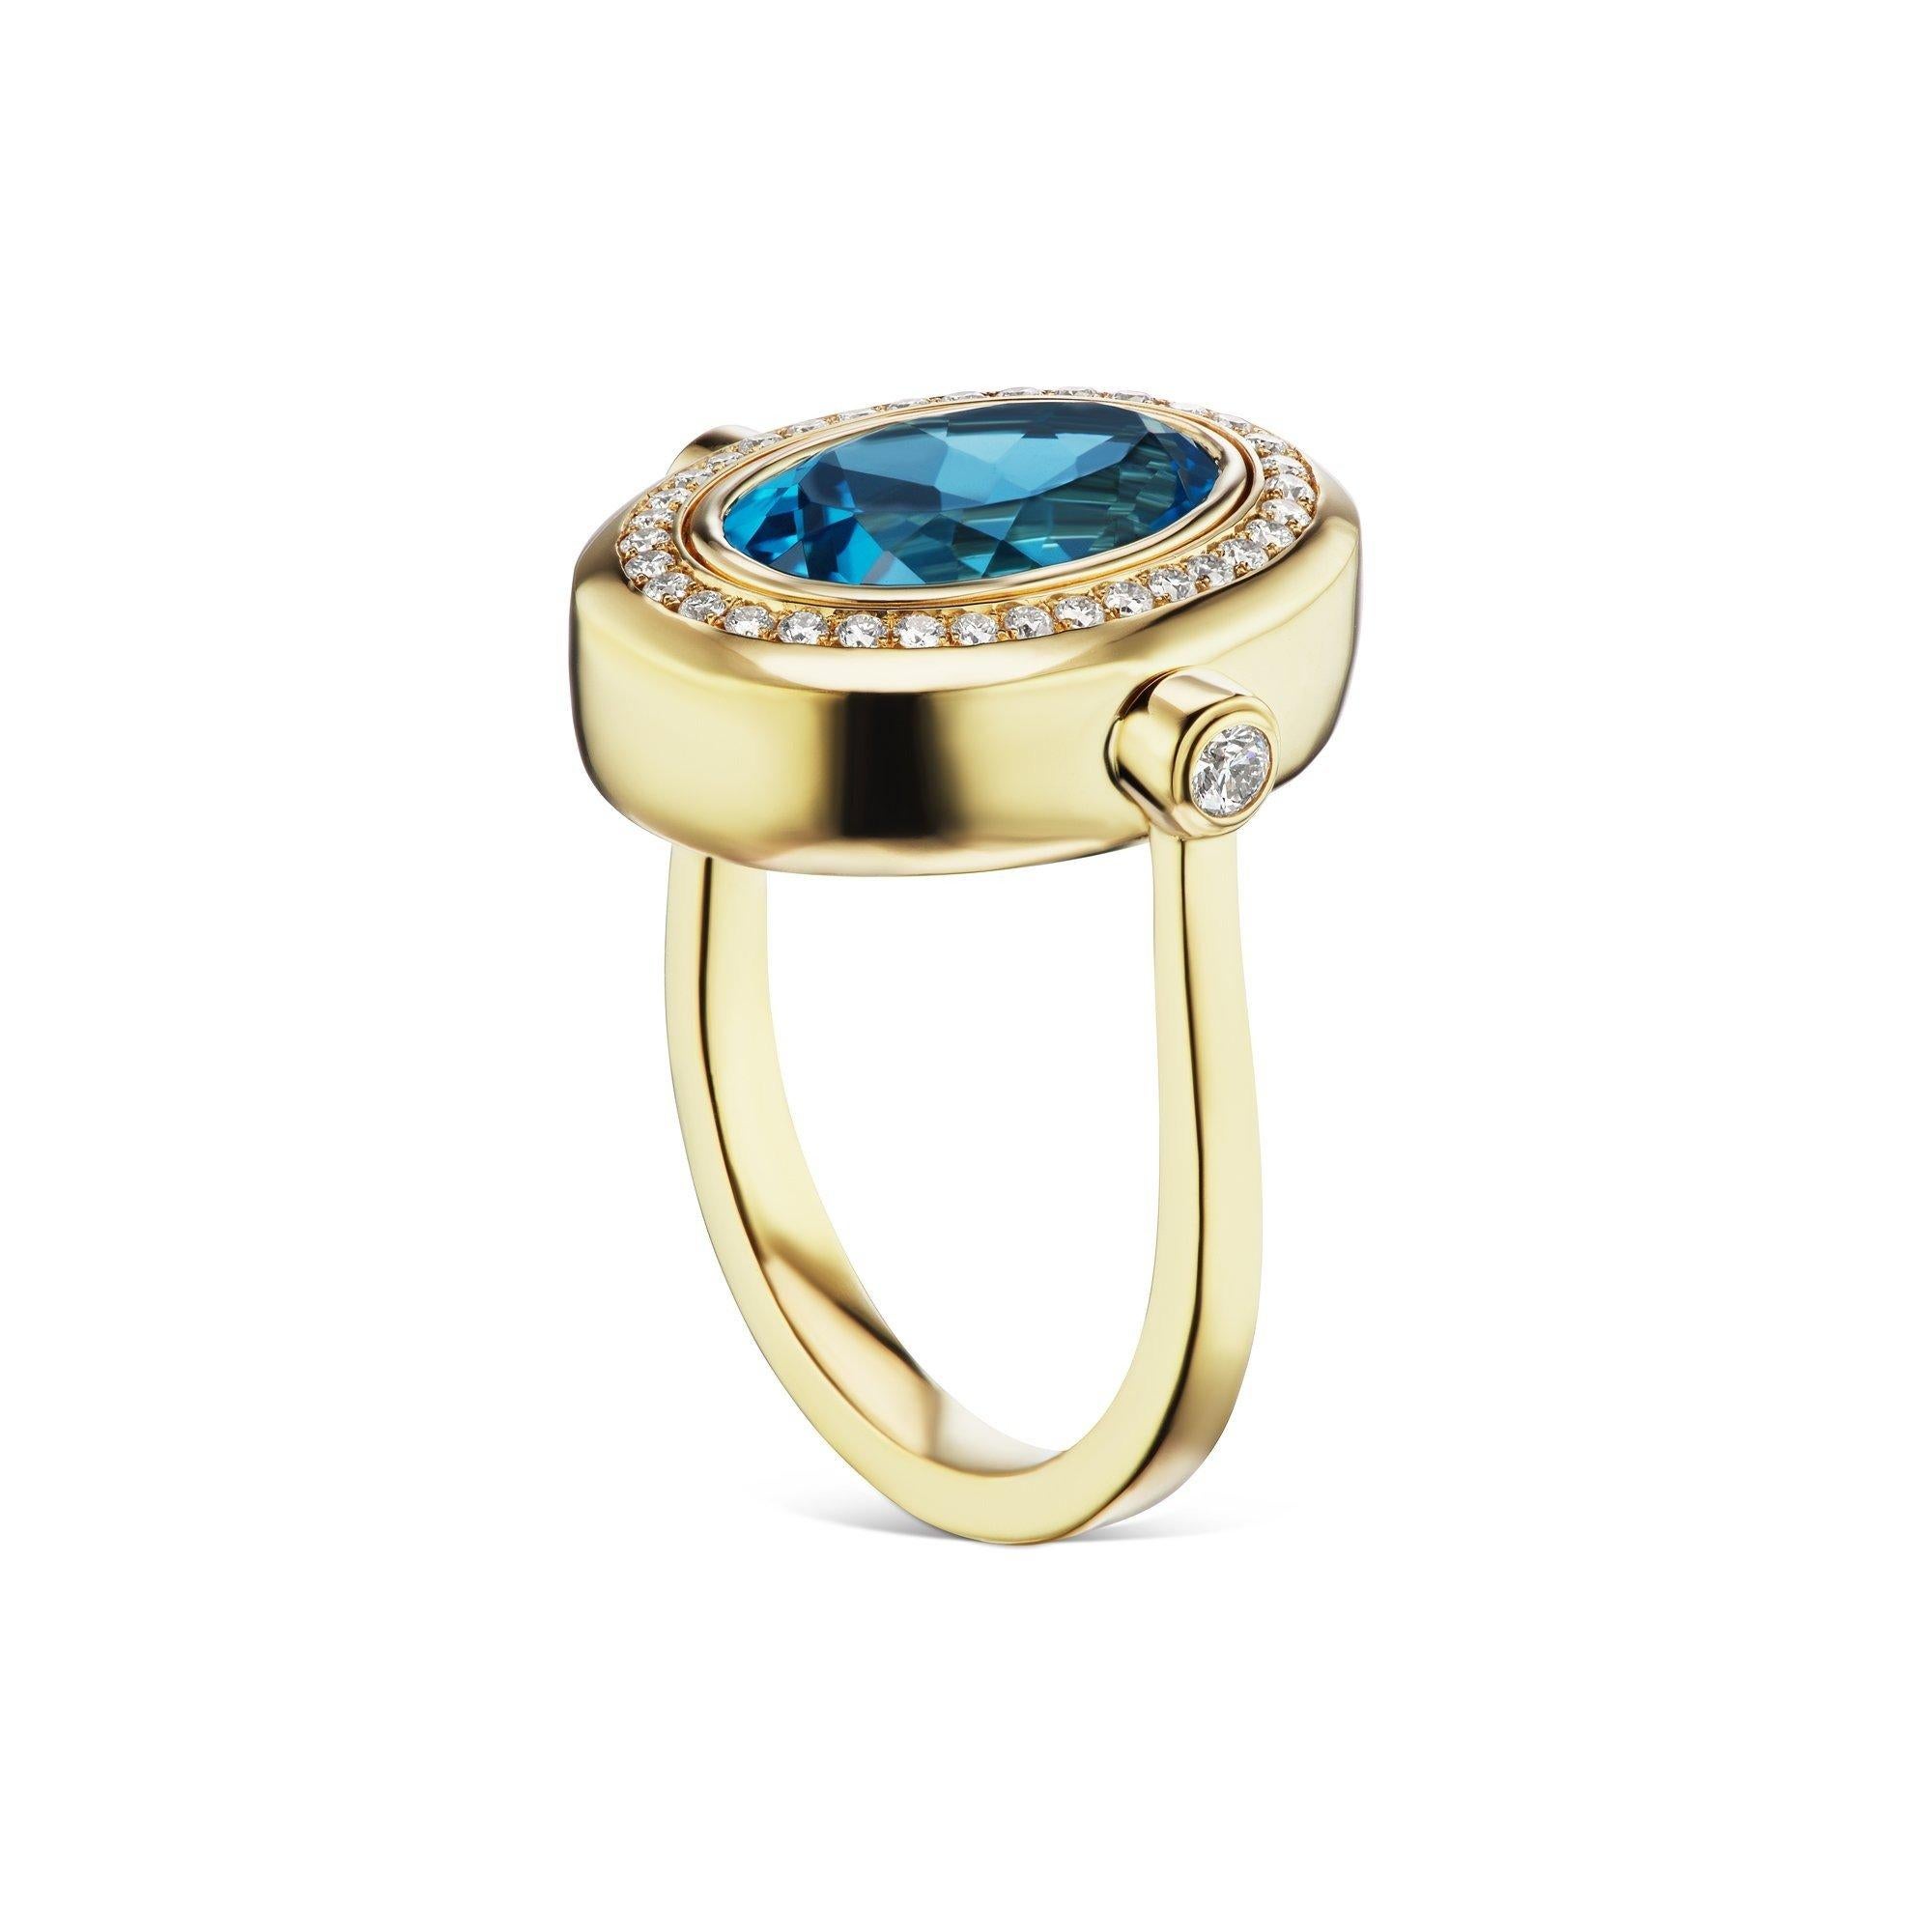 Get lost in the deep beauty of this one-of-a-kind Cocktail Ring featuring a London Blue Topaz center stone surrounded by a halo of White Diamonds. This ring also features White Diamond accents on the shank and is set in 14K yellow gold. 

14k Yellow